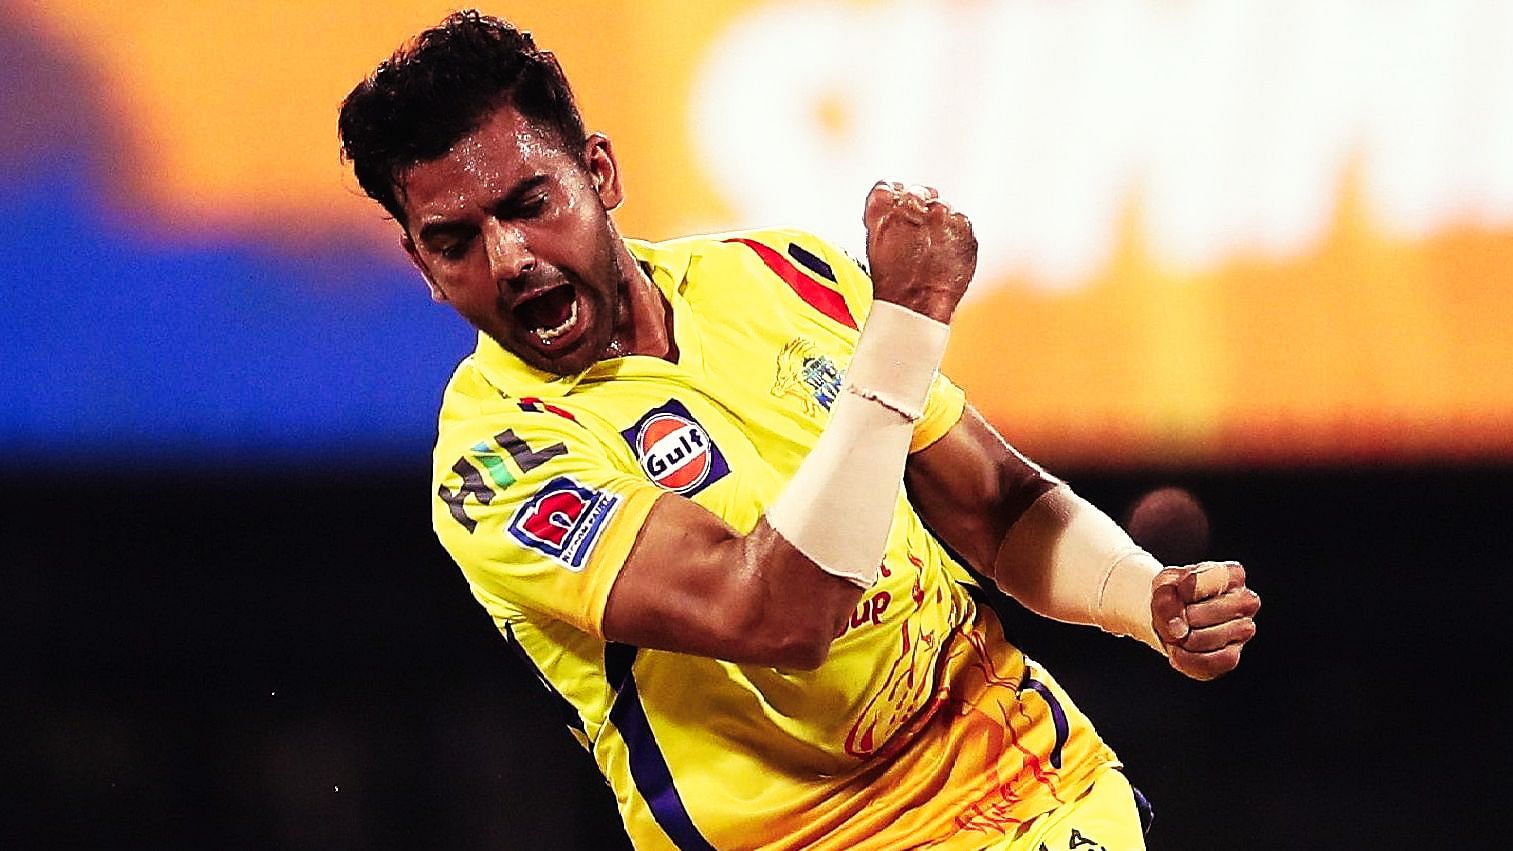 Deepak Chahar finished with figures of 3 for 20 from 4 overs rattling the KKR top-order with early strikes.